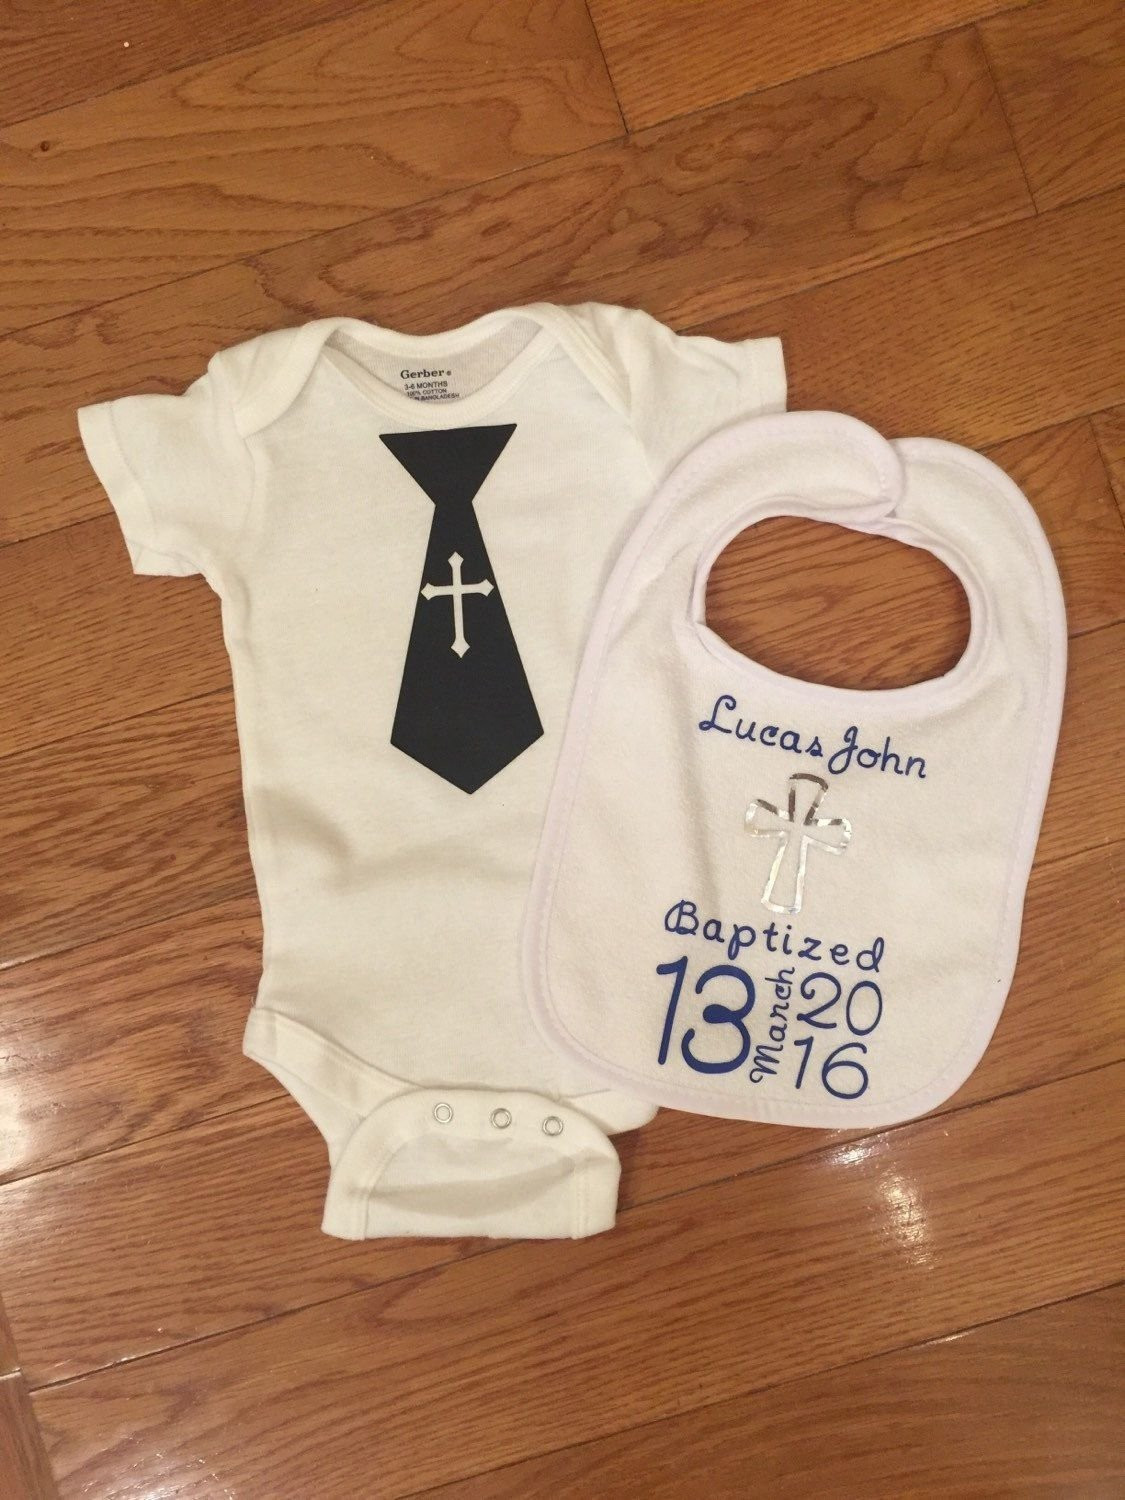 Baptism Gift Ideas For Boys
 10 Unique Christening Gift Ideas For Boys 2020